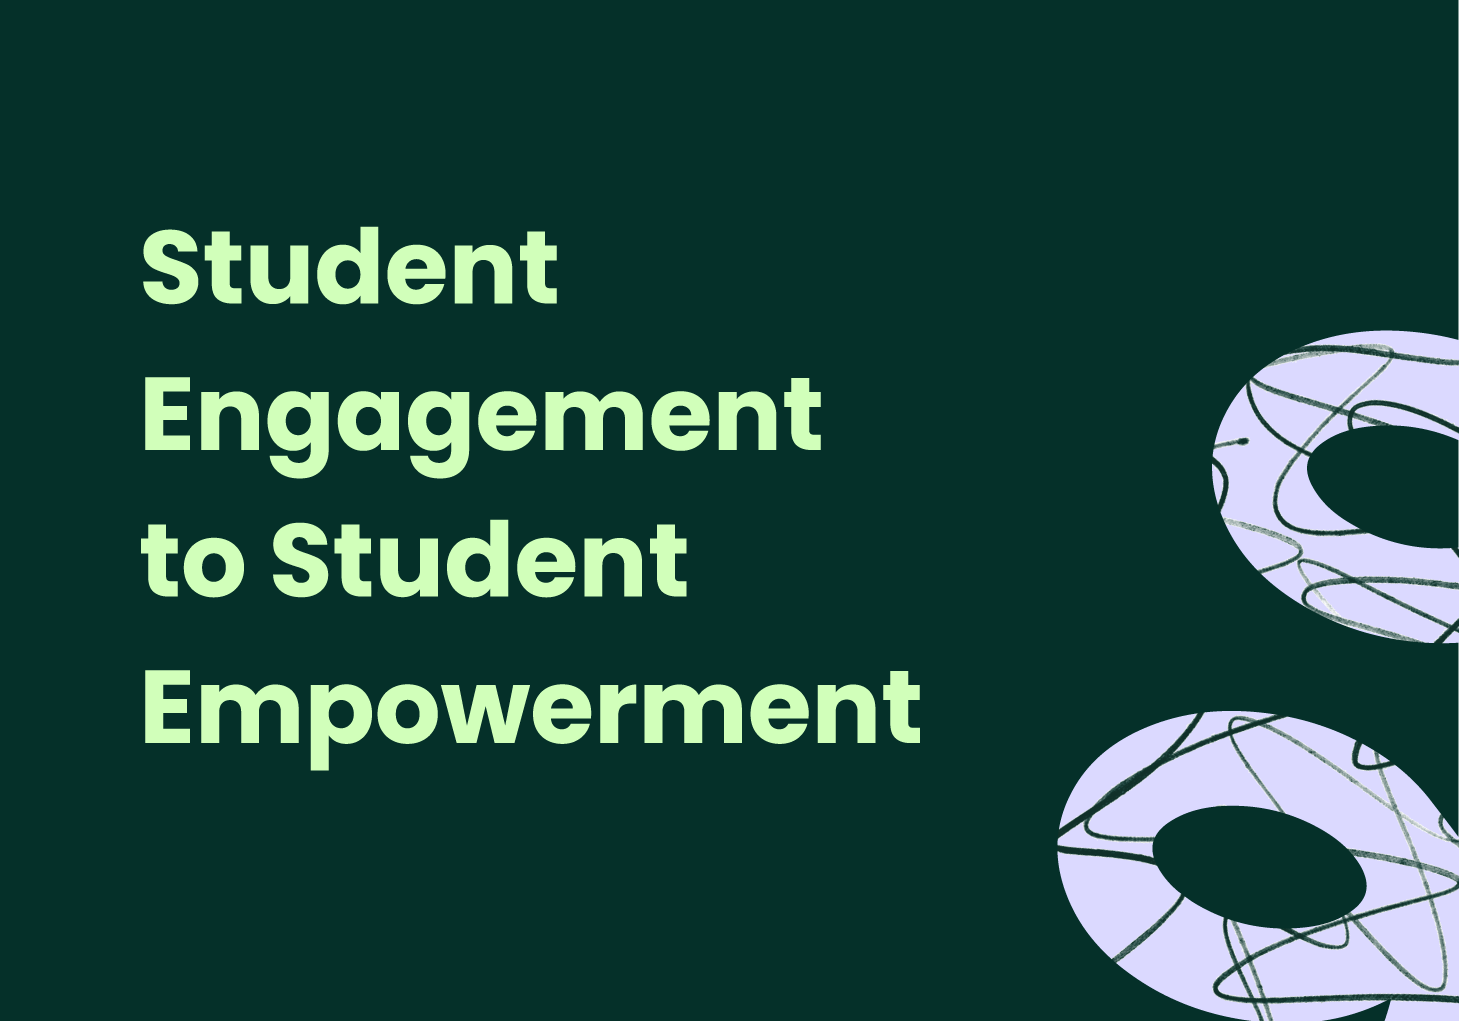 Student Engagement to Student Empowerment